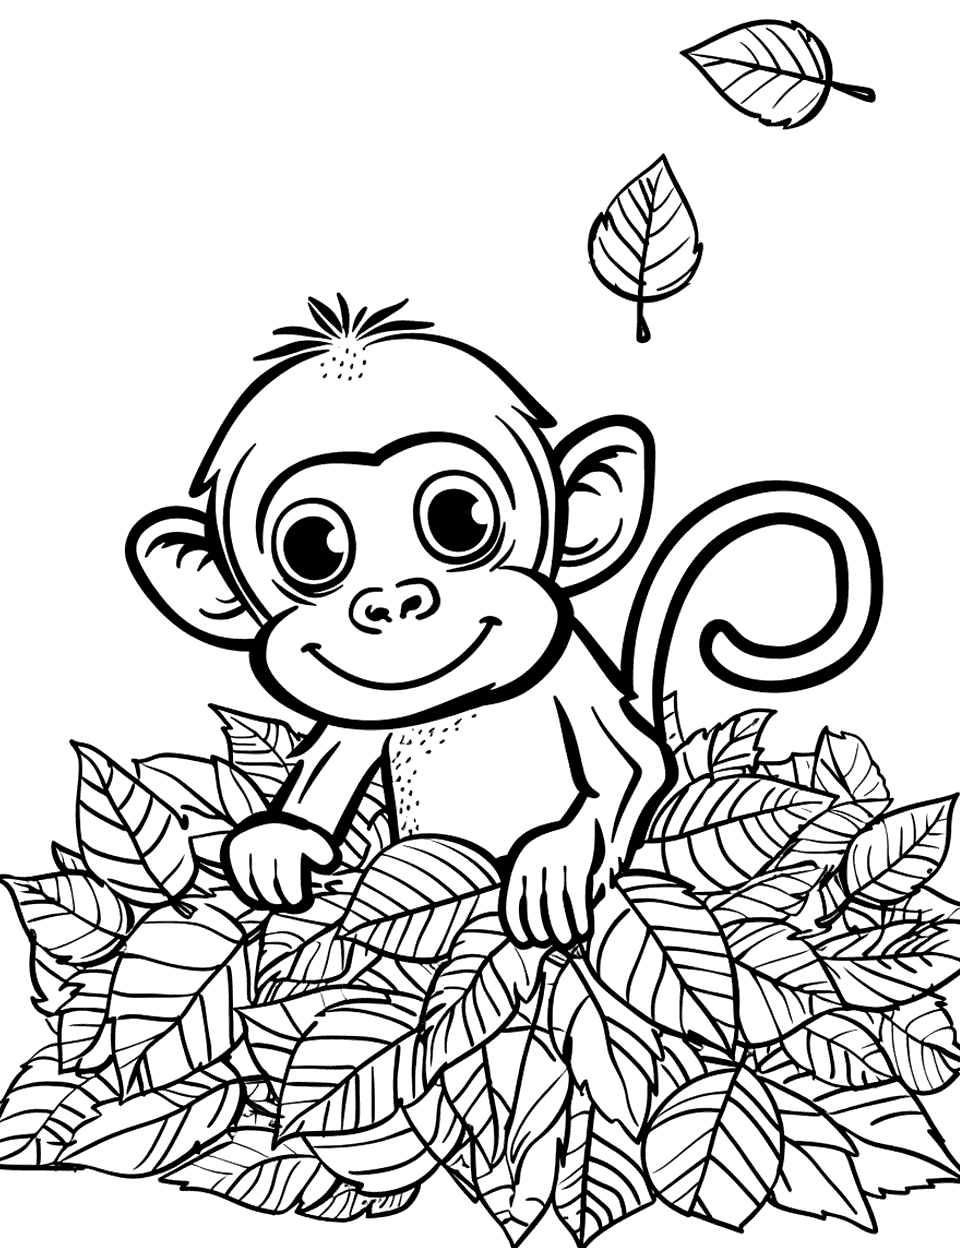 Monkey in a Leaf Pile Coloring Page - A monkey frolicking in a pile of autumn leaves, looking amused.